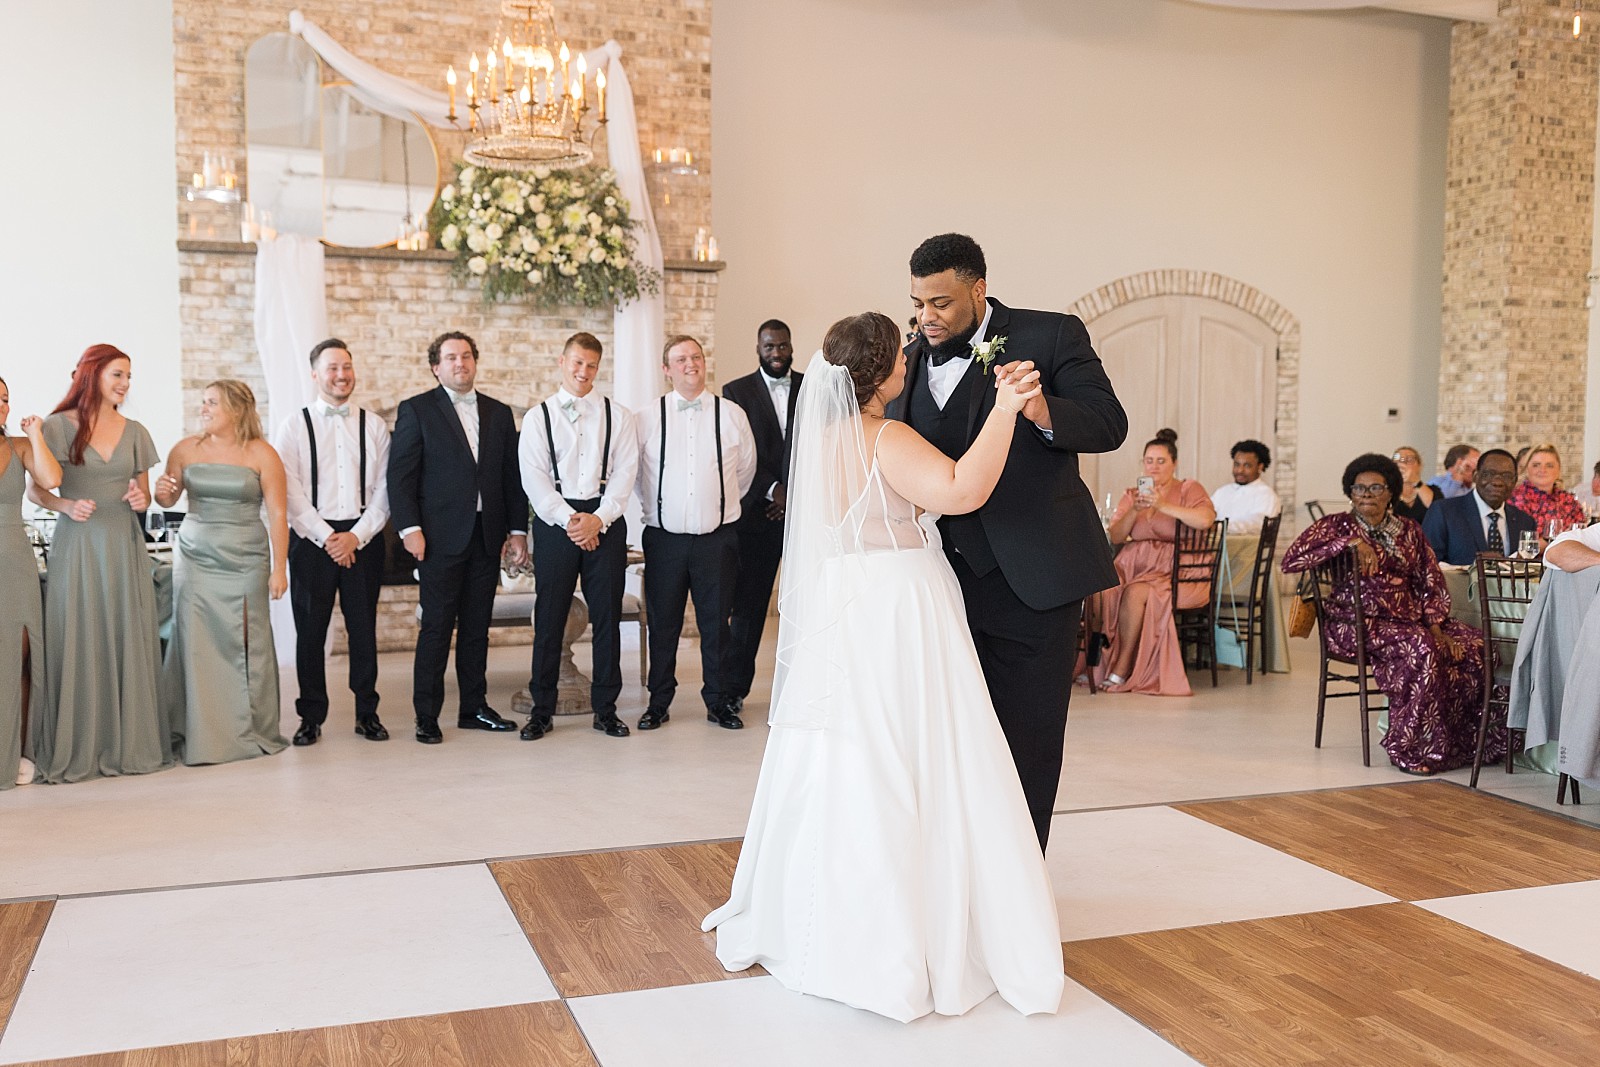 Bride and groom first dance at Wrightsville Manor in Wilmington | North Carolina Wedding Photographer